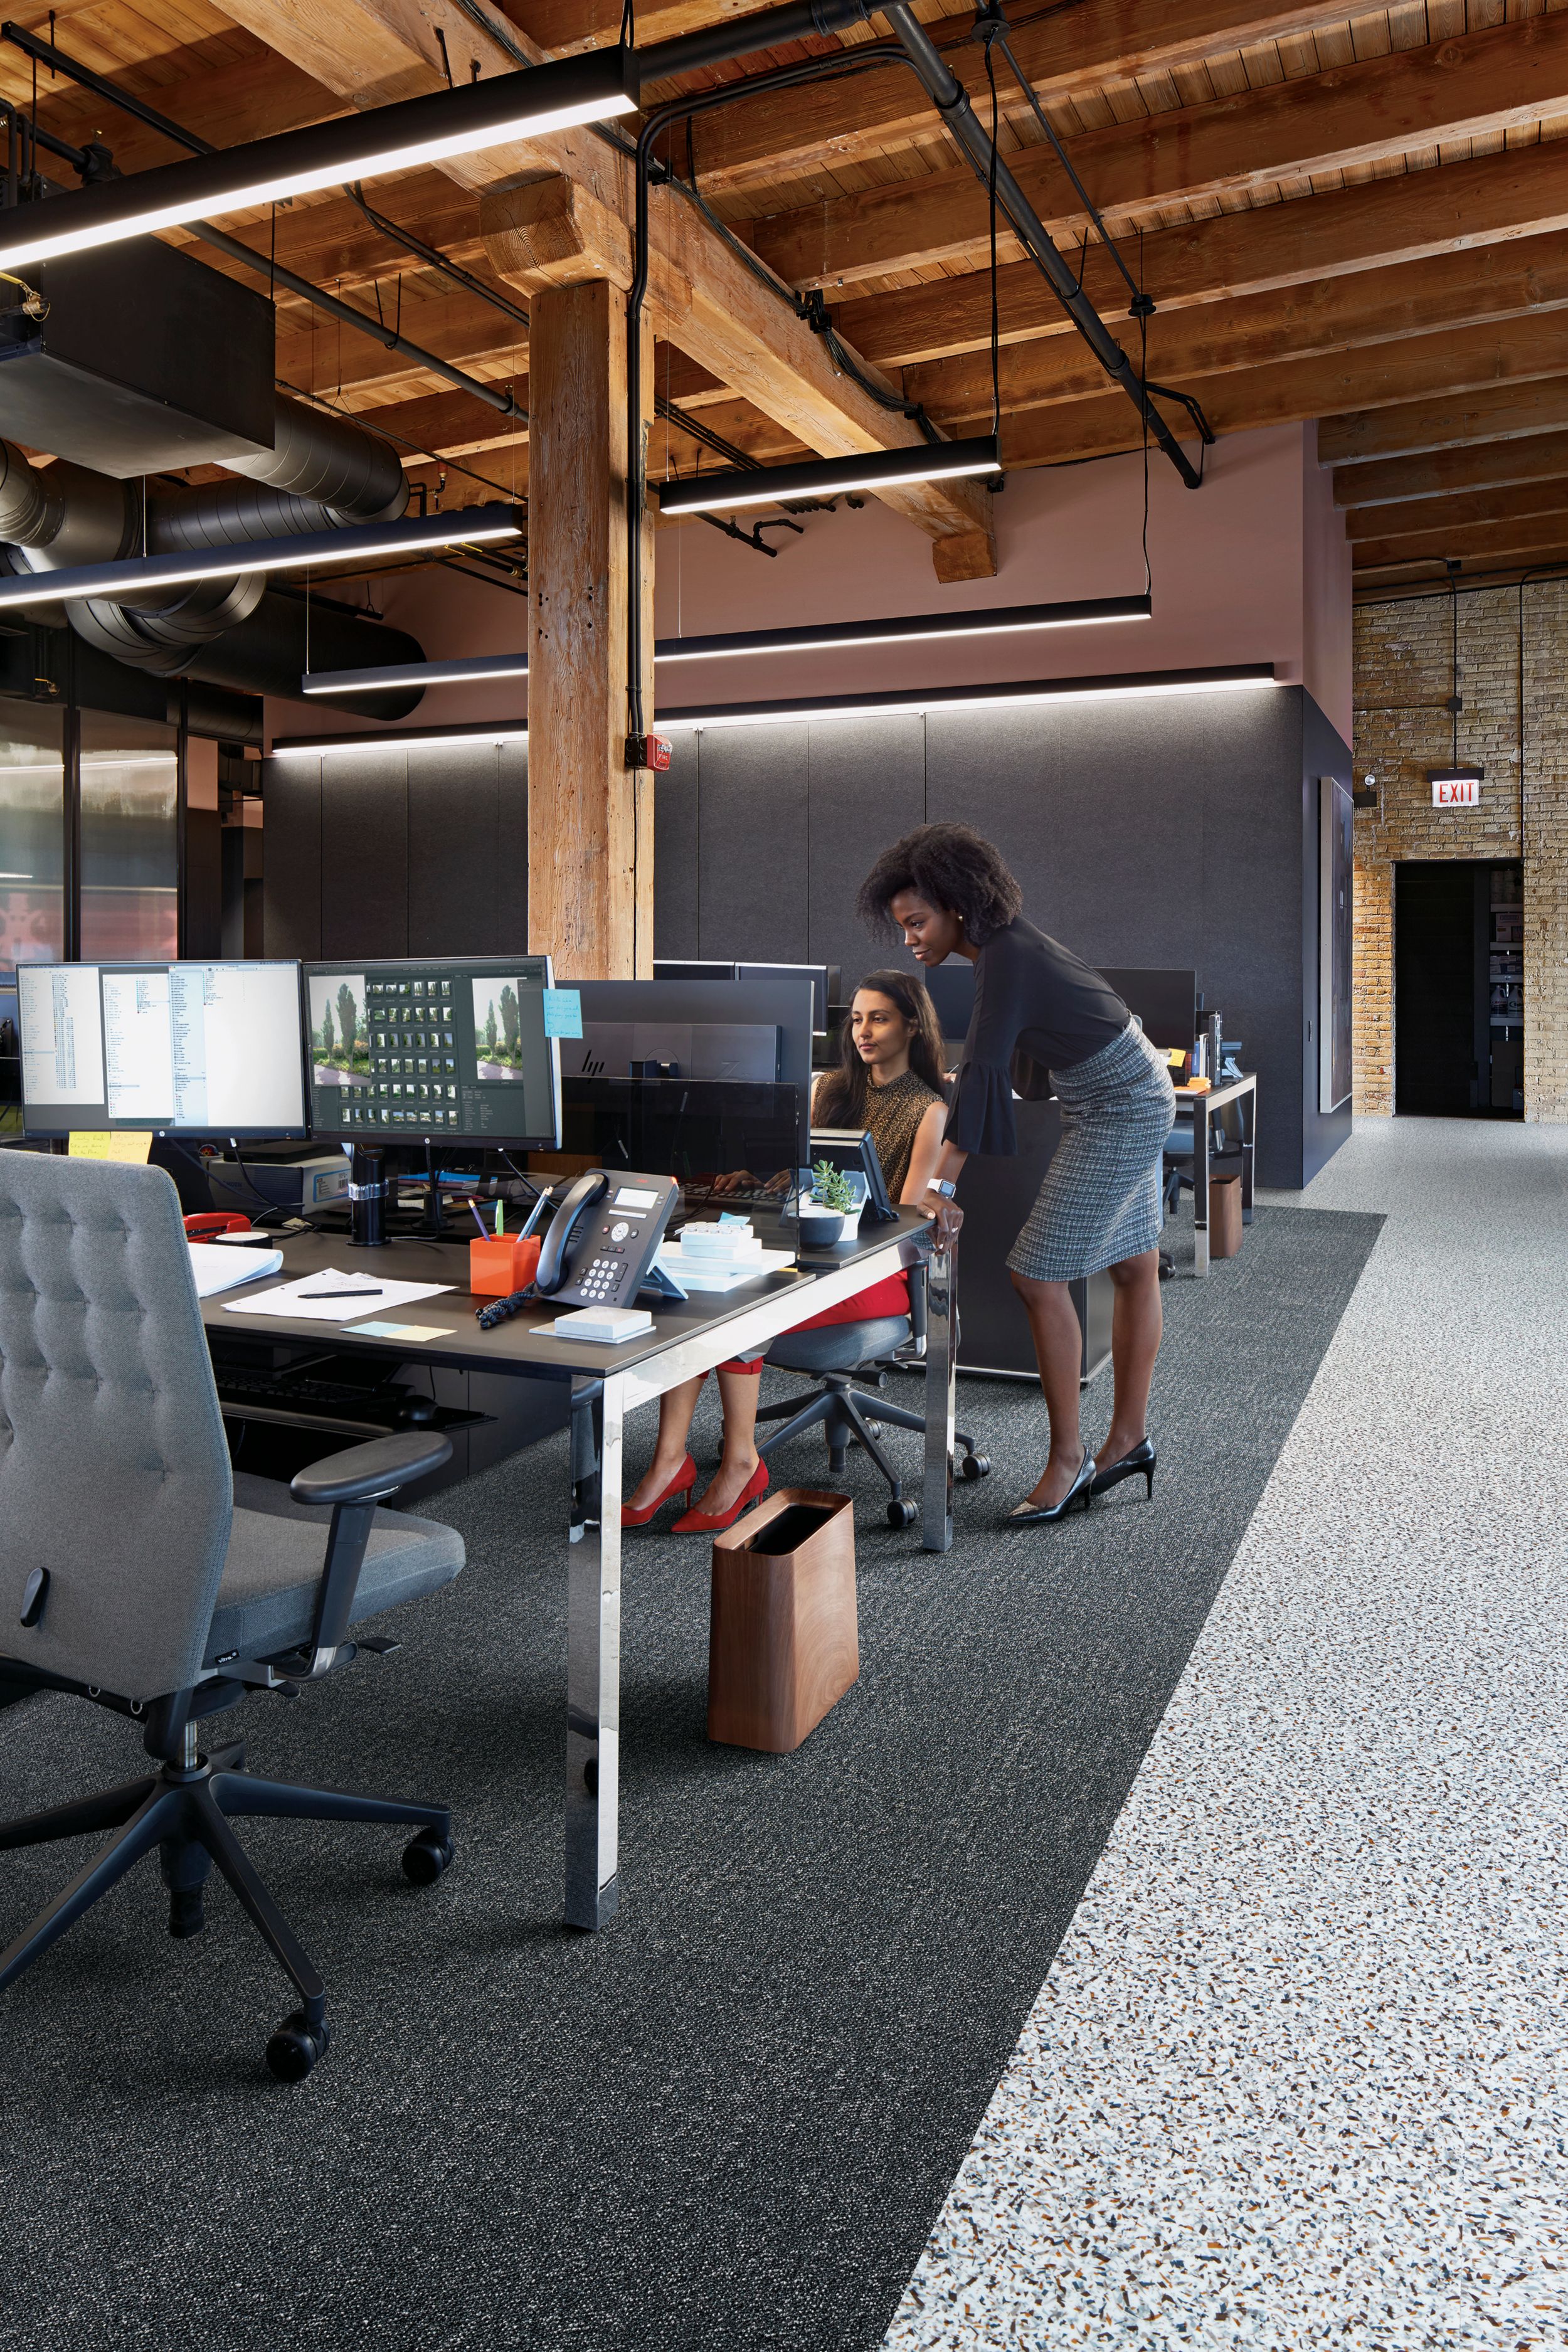 Interface Step it Up and Walk on By carpet tile in common work space with two people afbeeldingnummer 4